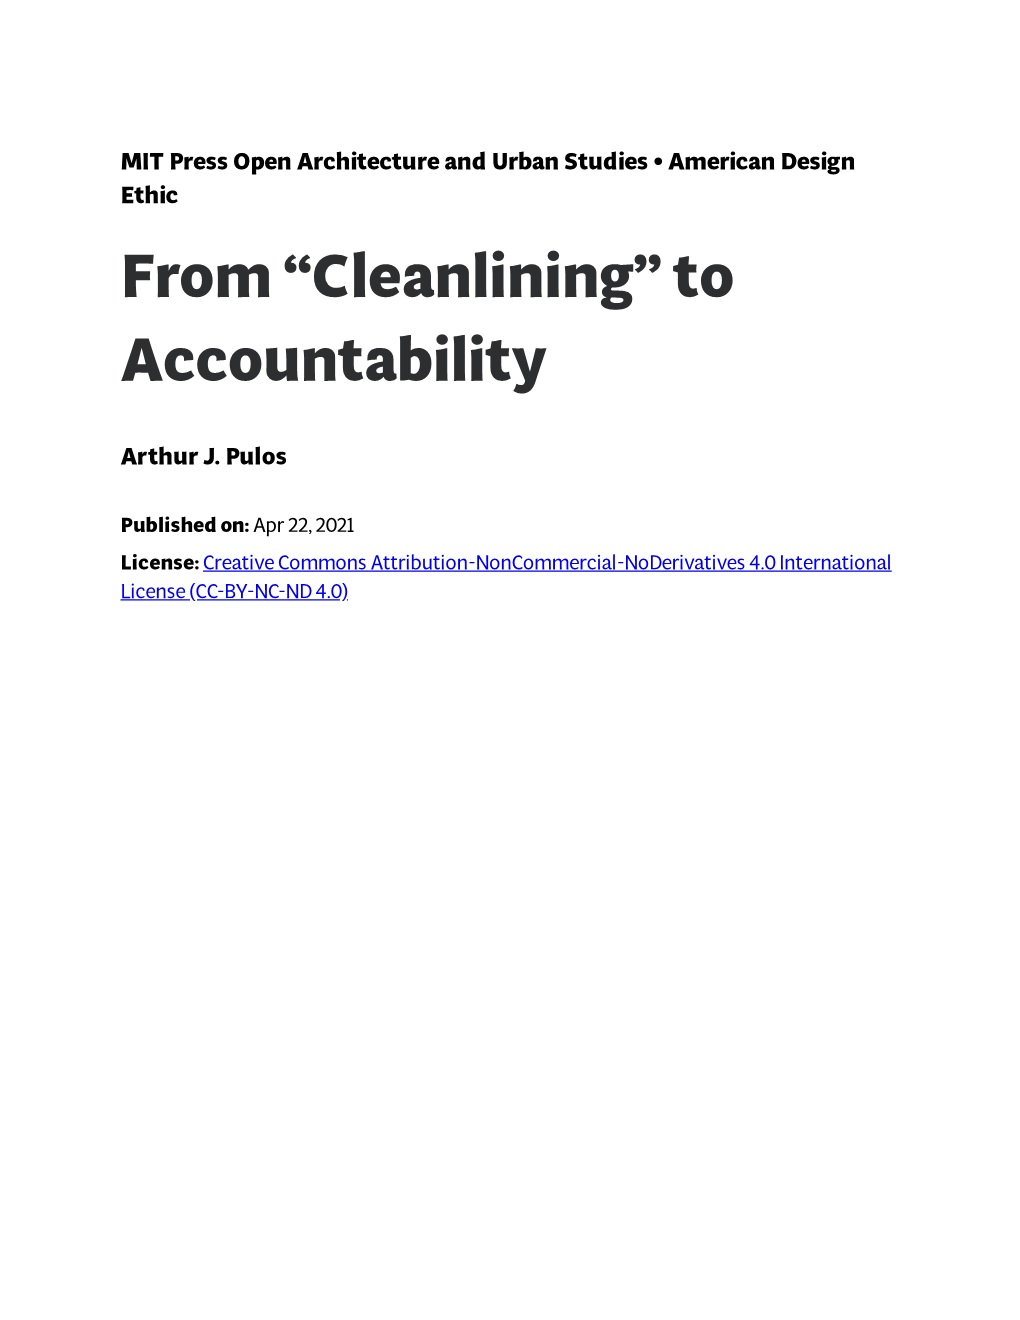 From ˝Cleanlining˛ to Accountability